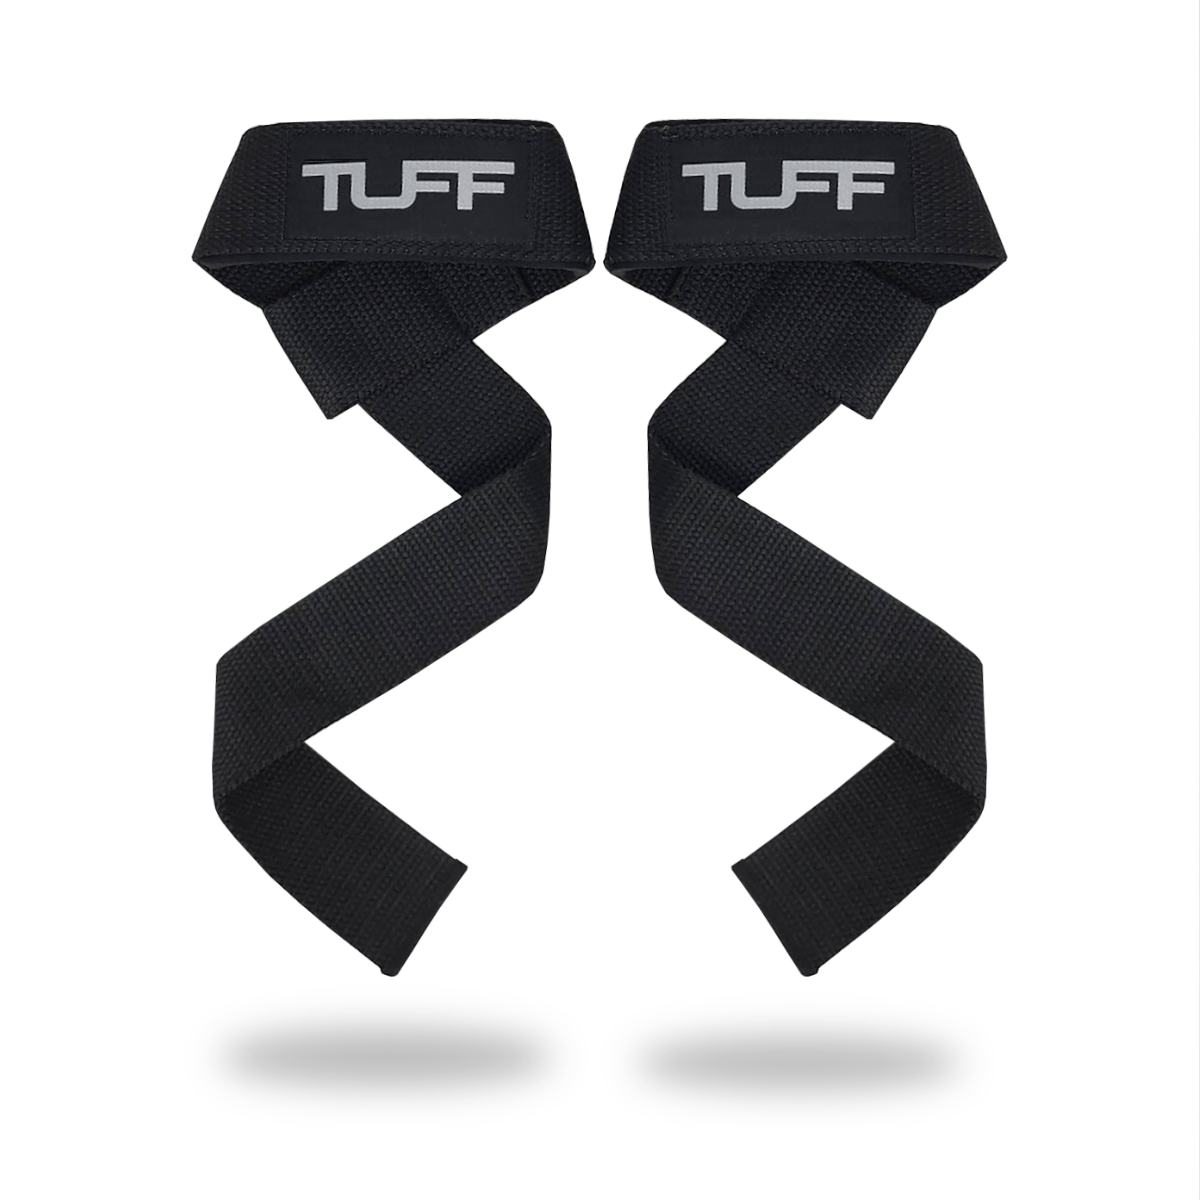 Lifting Straps  Premium Padded Weightlifting Straps - Gray